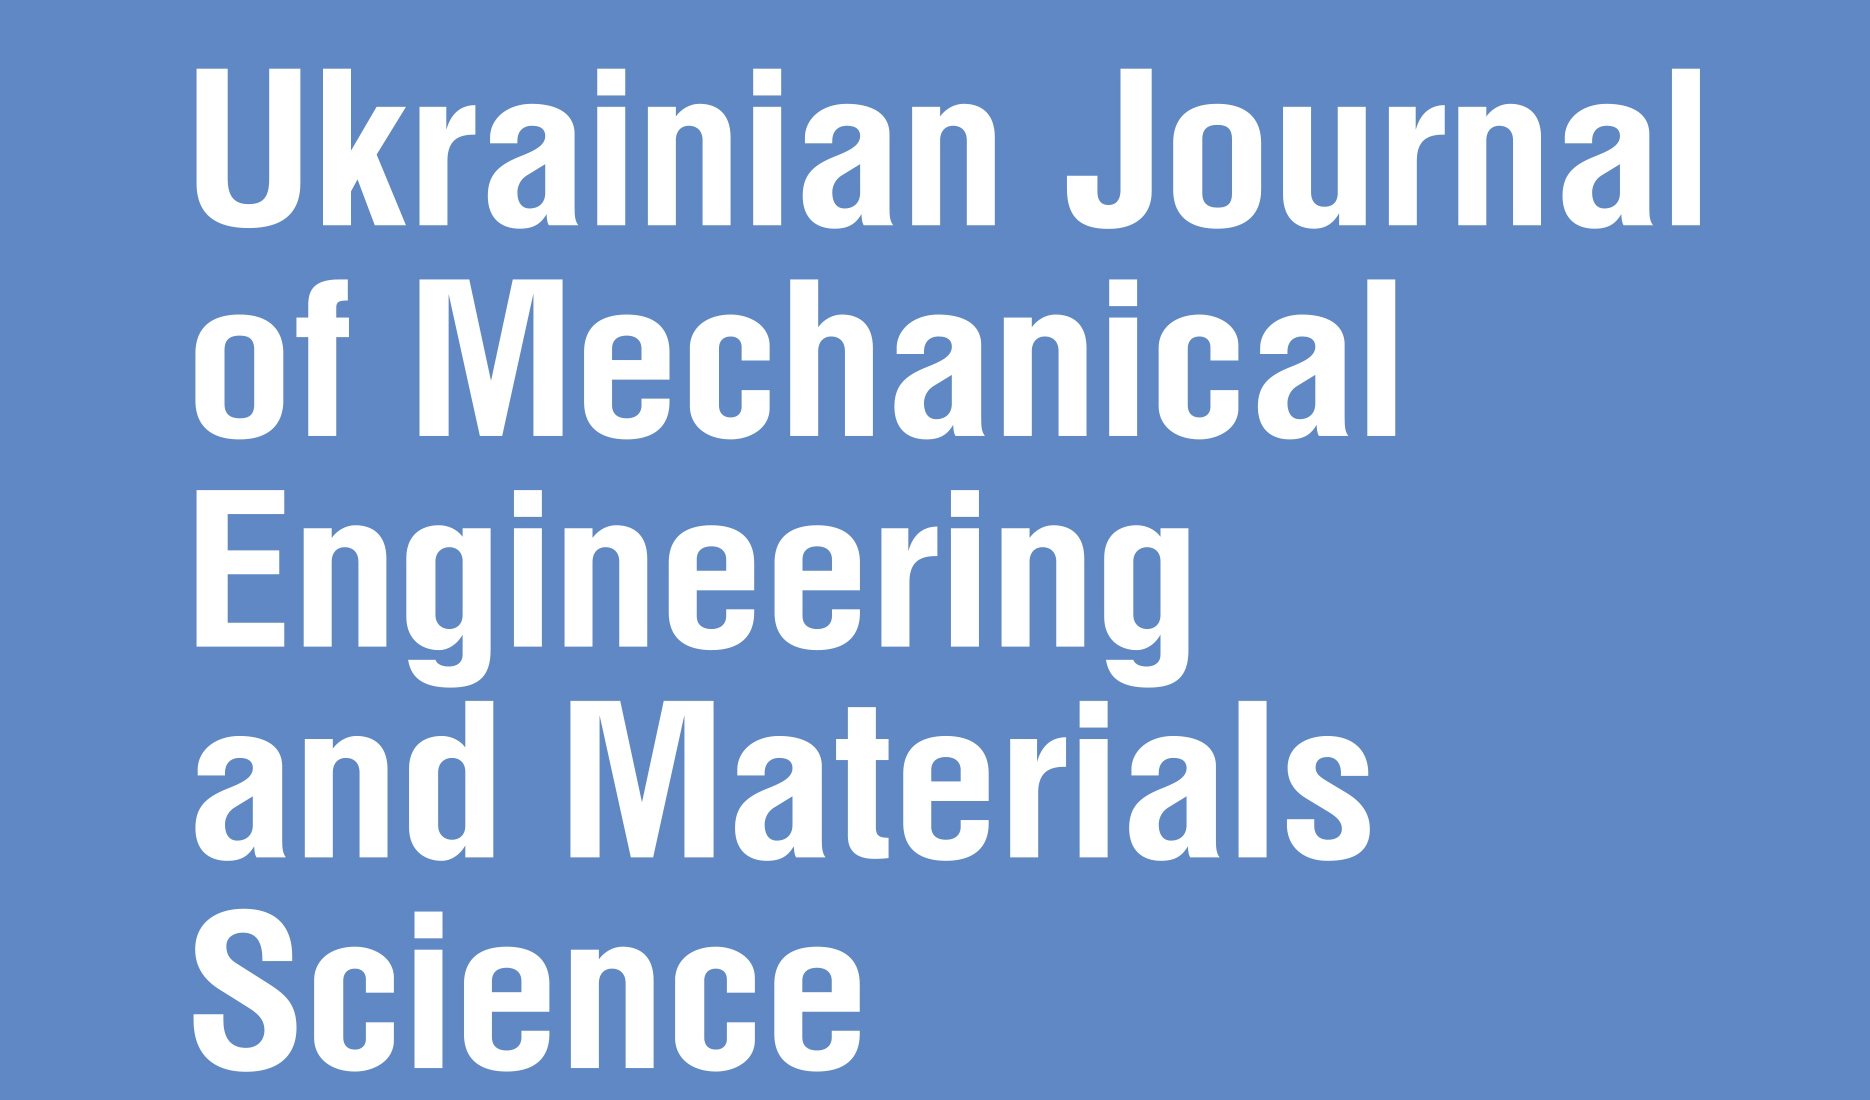 «Ukrainian Journal of Mechanical Engineering and Materials Science»